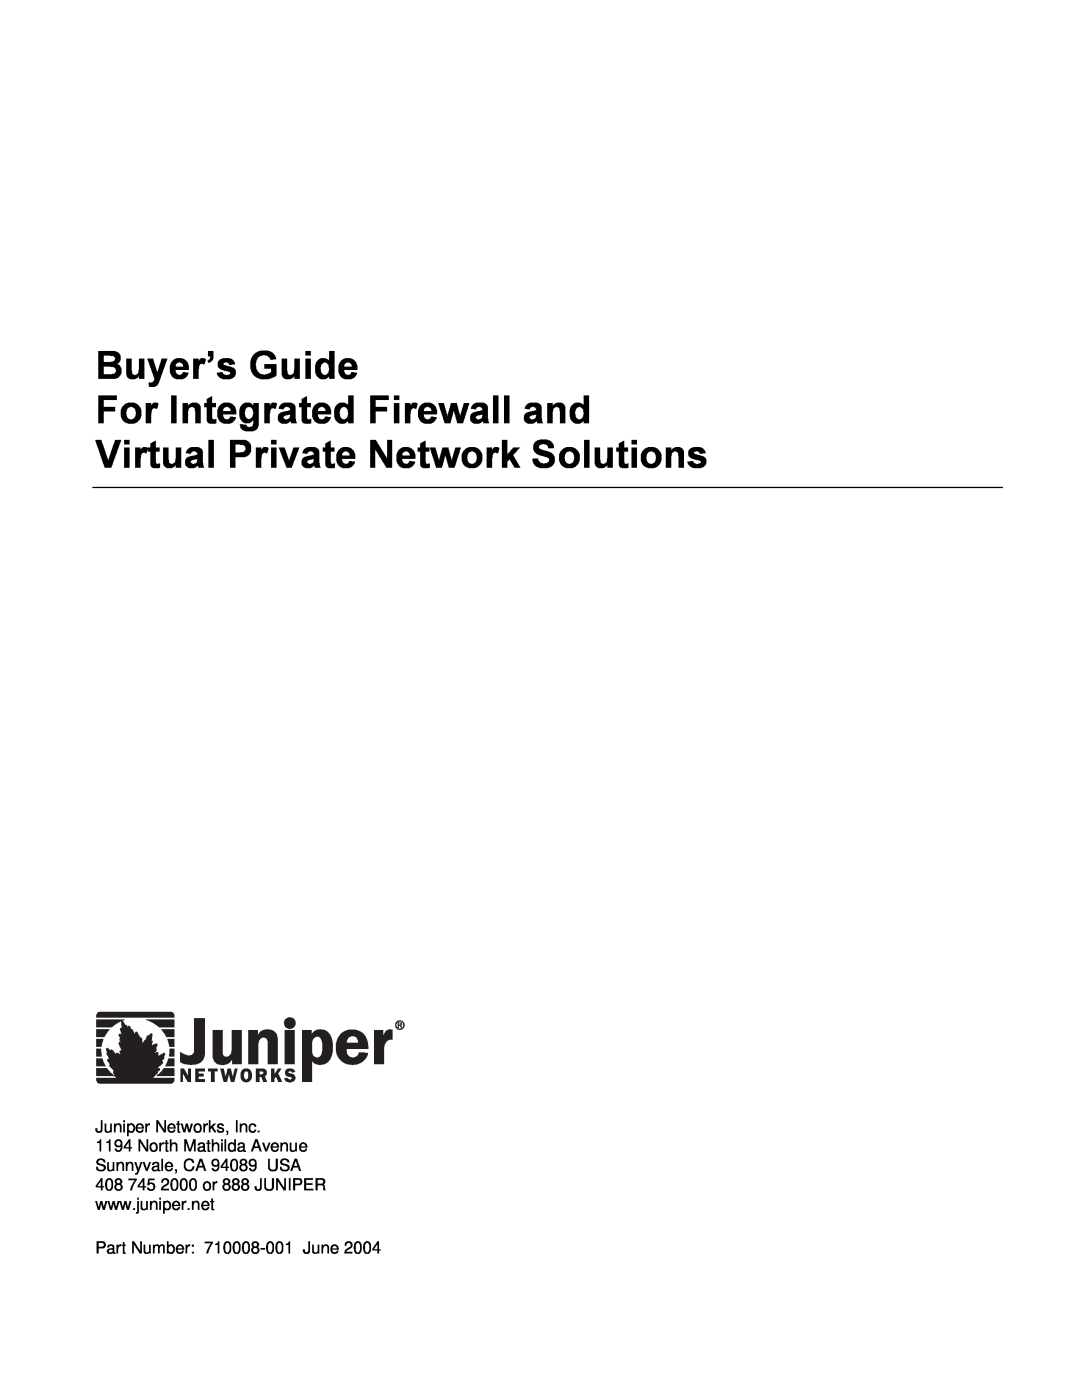 Juniper Networks 710008-001 manual Buyer’s Guide For Integrated Firewall and, Virtual Private Network Solutions 